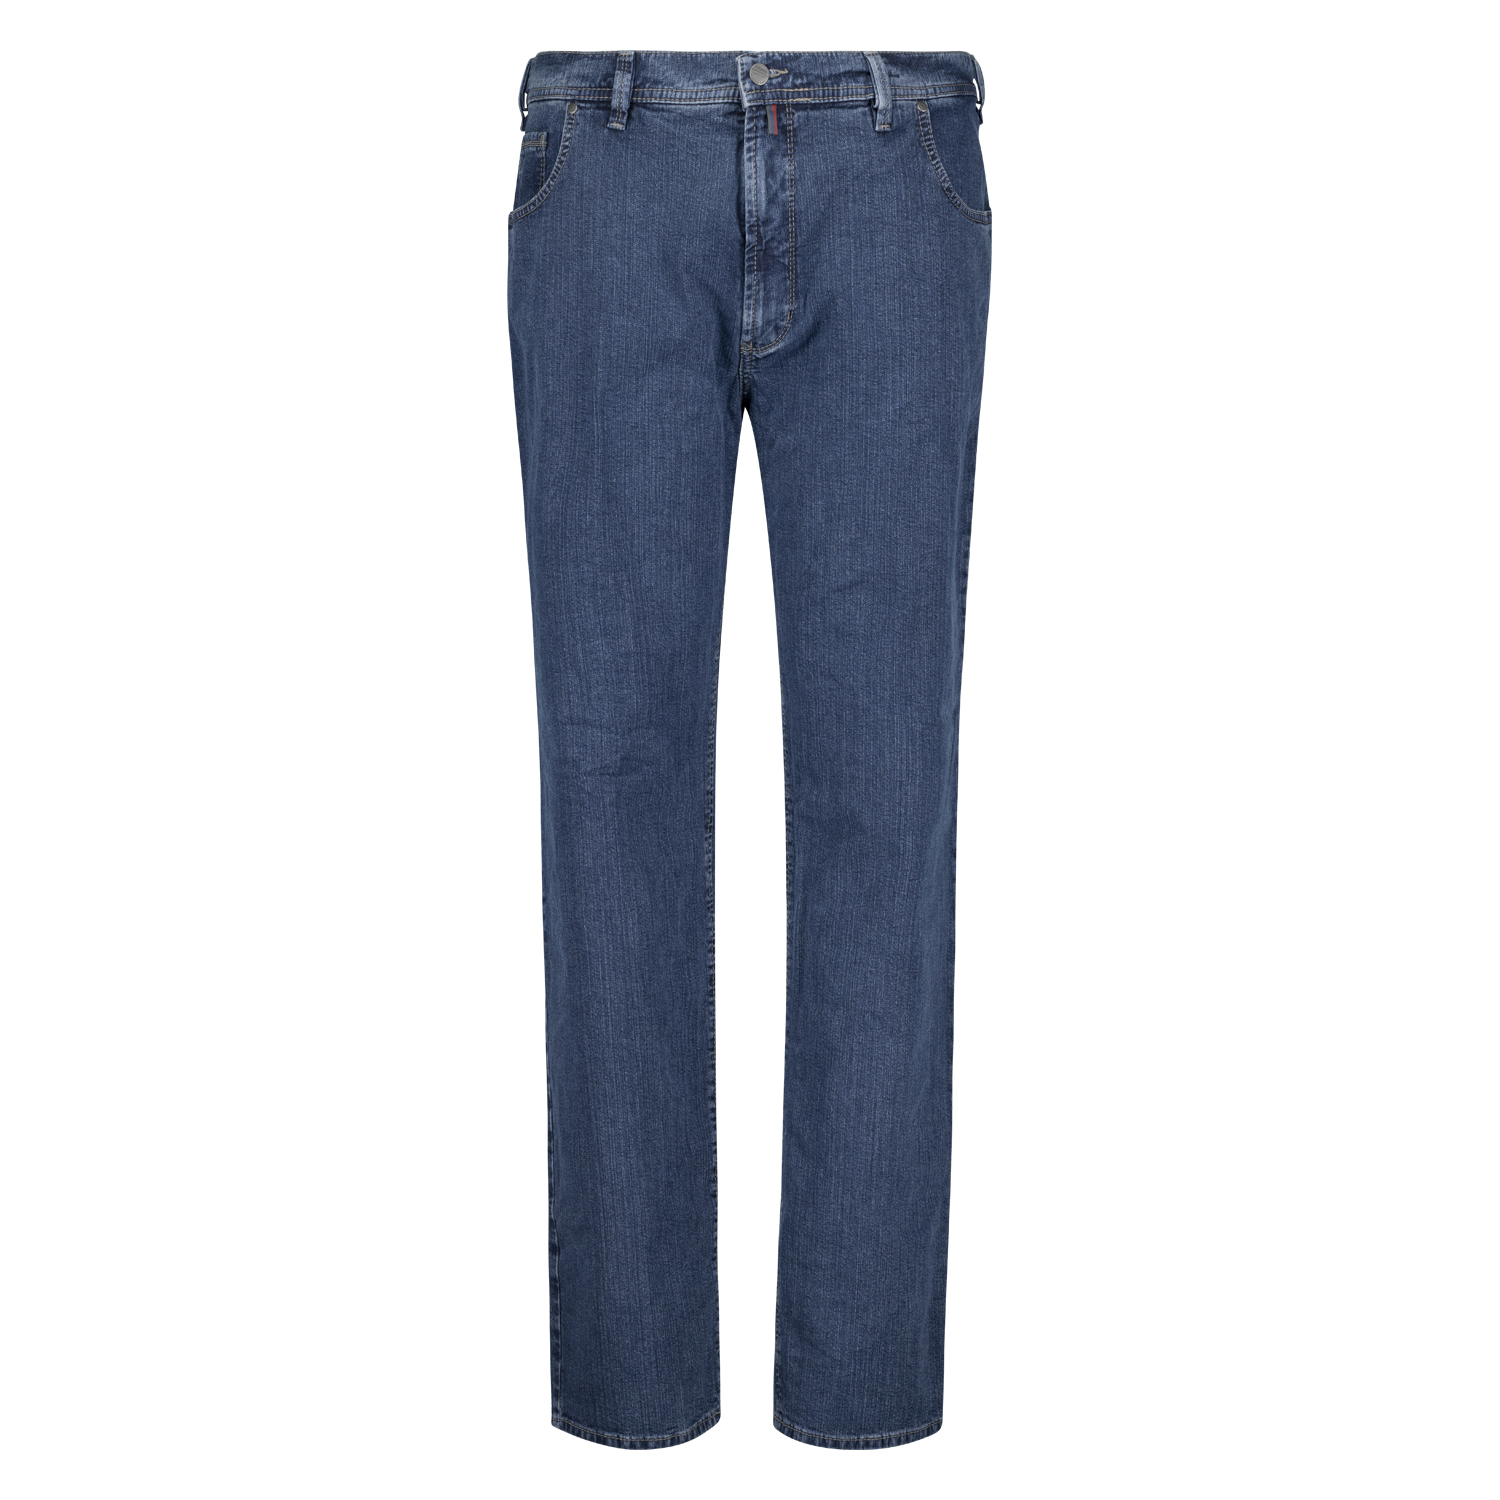 Stone-washed five-pocket-jeans blue by Pionier in extra large sizes up to 40, 70 and 85